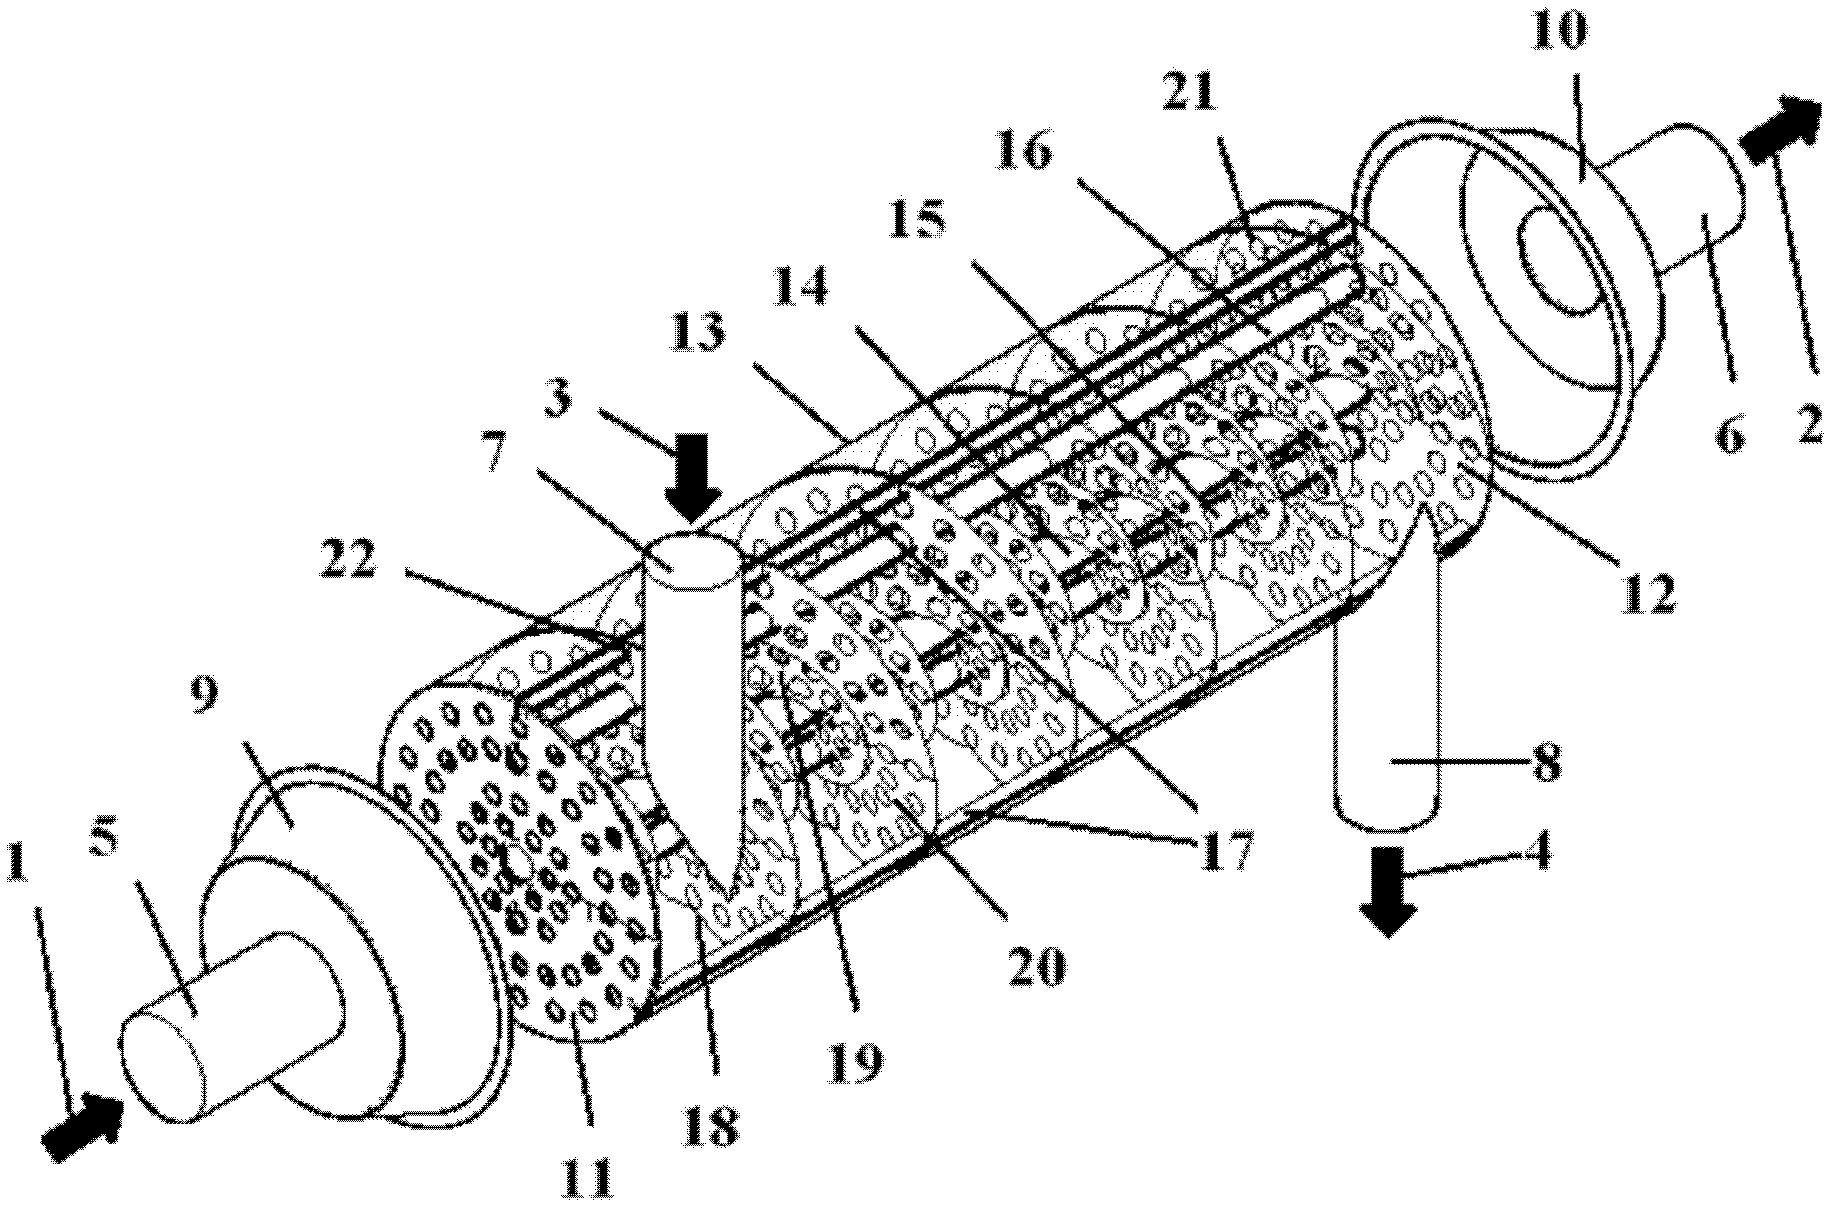 Shell-and-tube heat exchanger with combined type one-shell-pass continuous spiral baffles